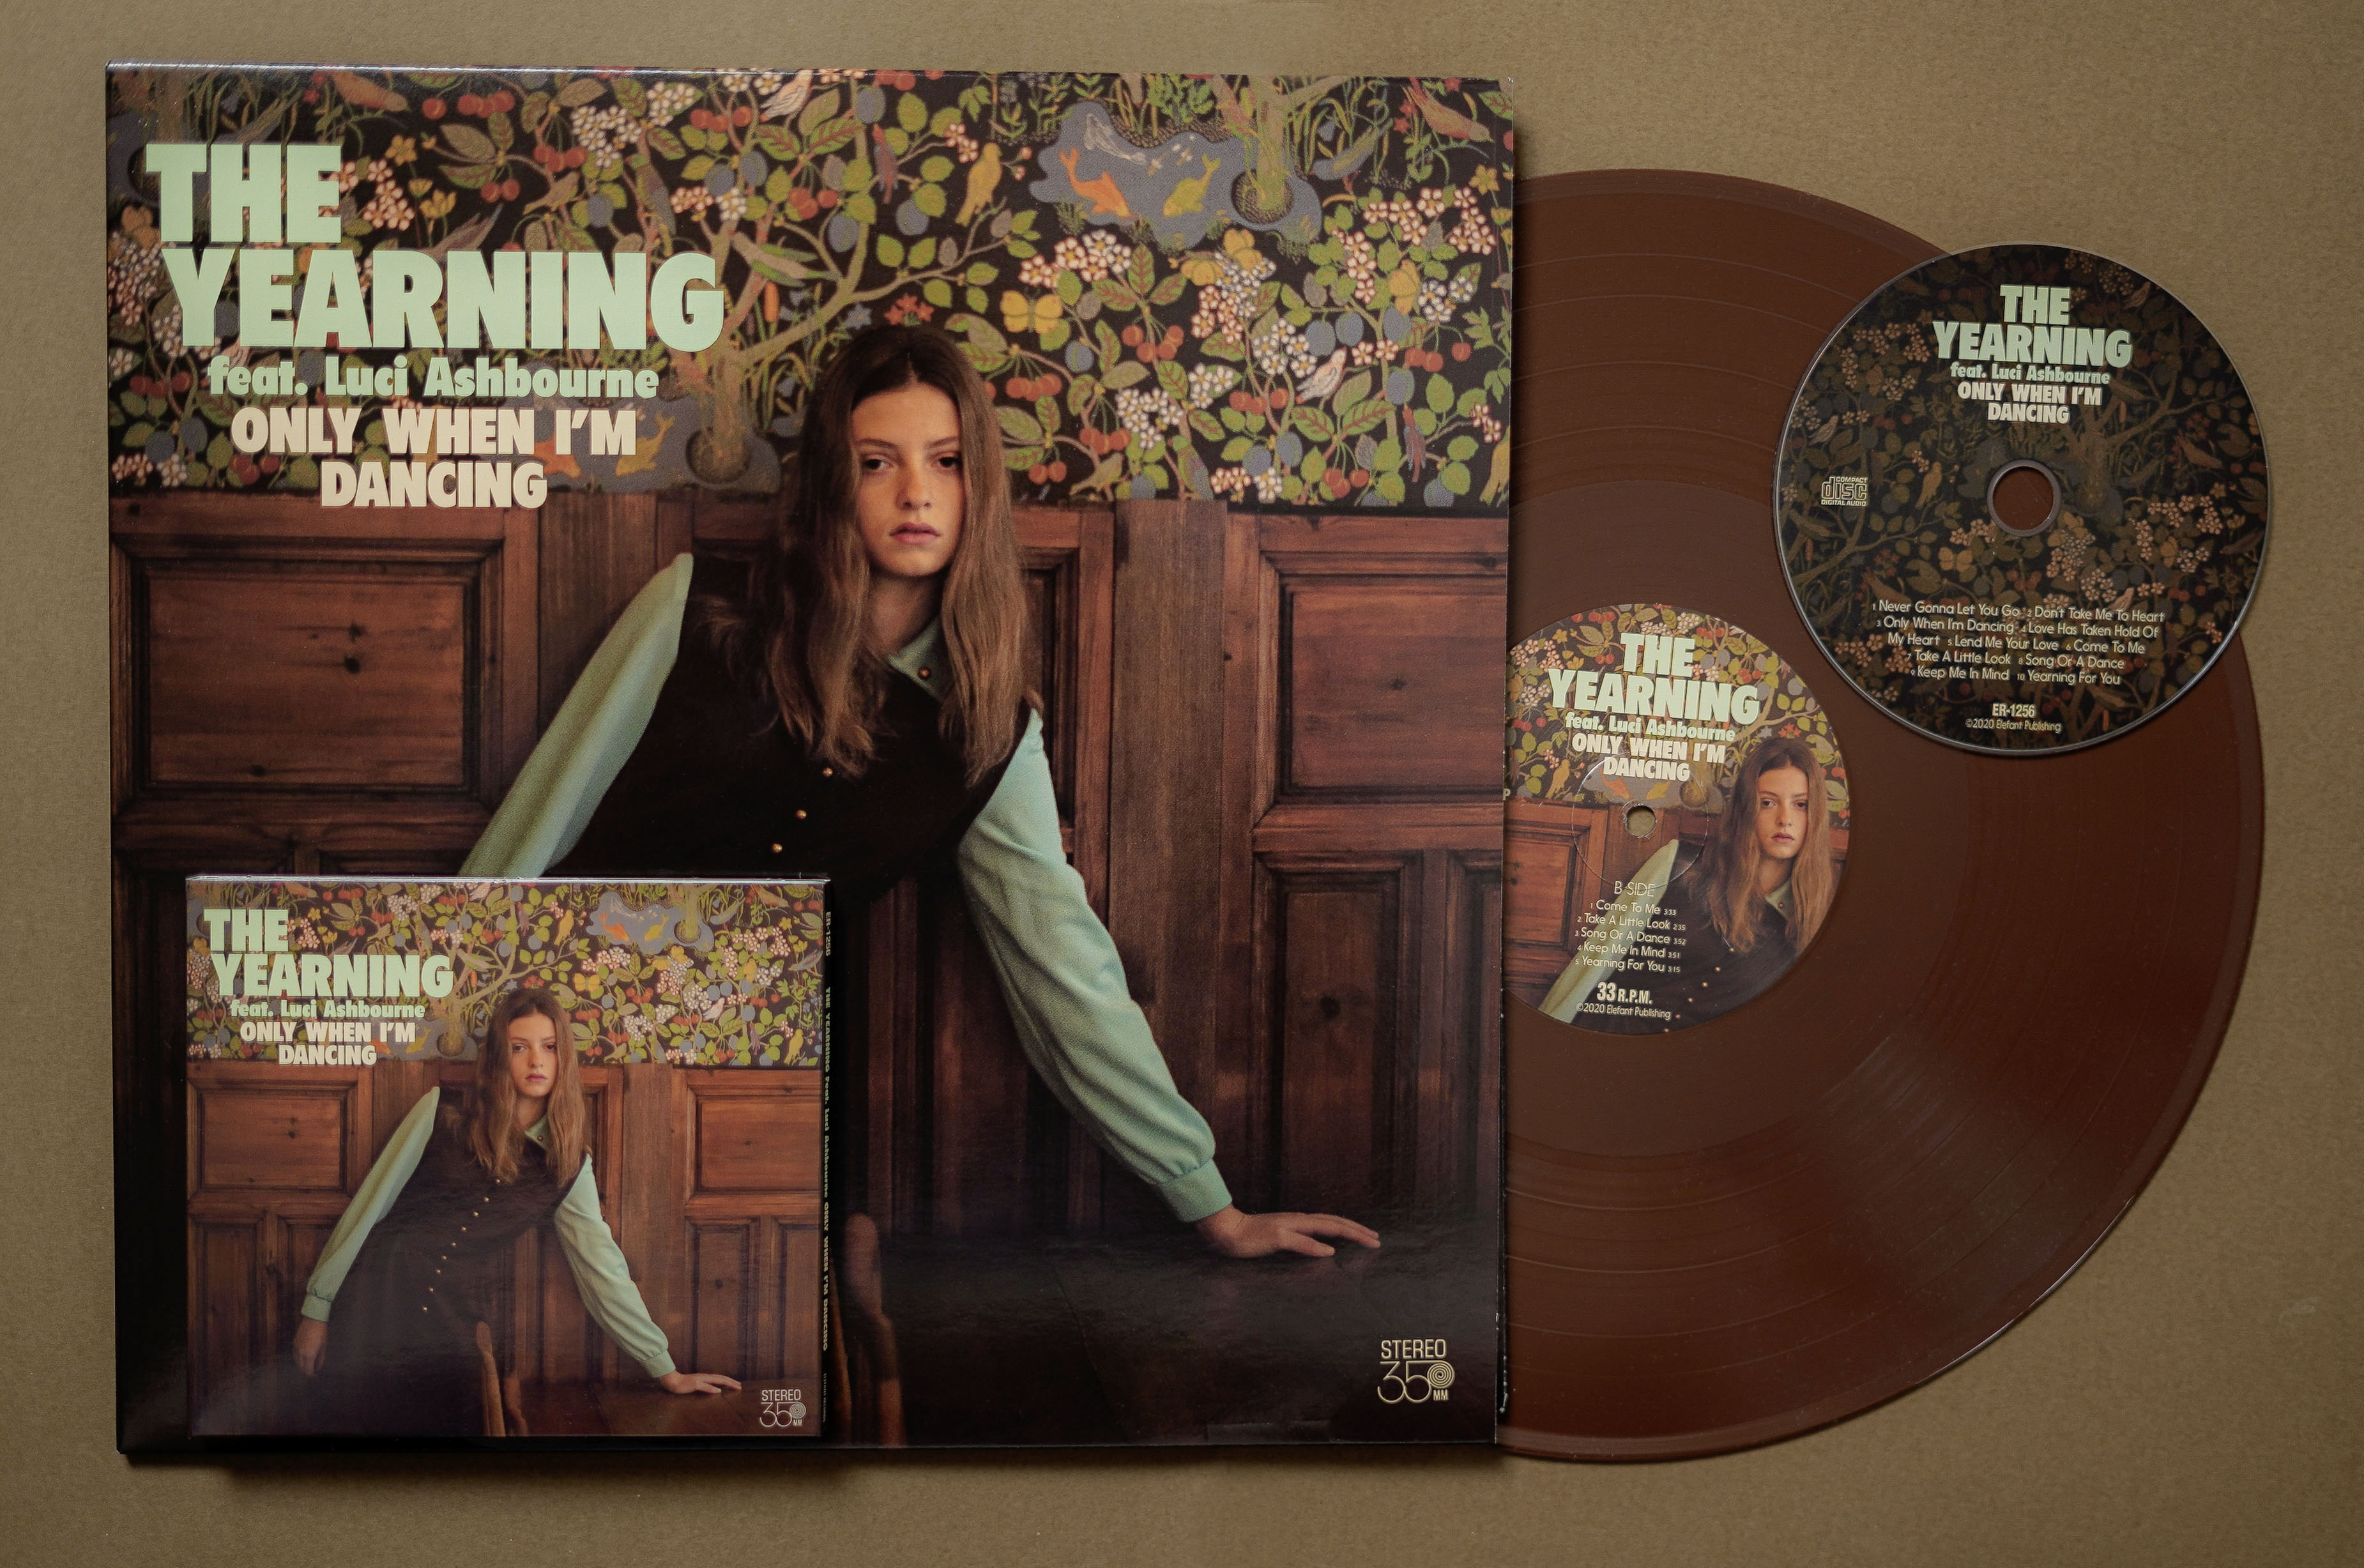 The Yearning "Only When I'm Dancing" LP y CD